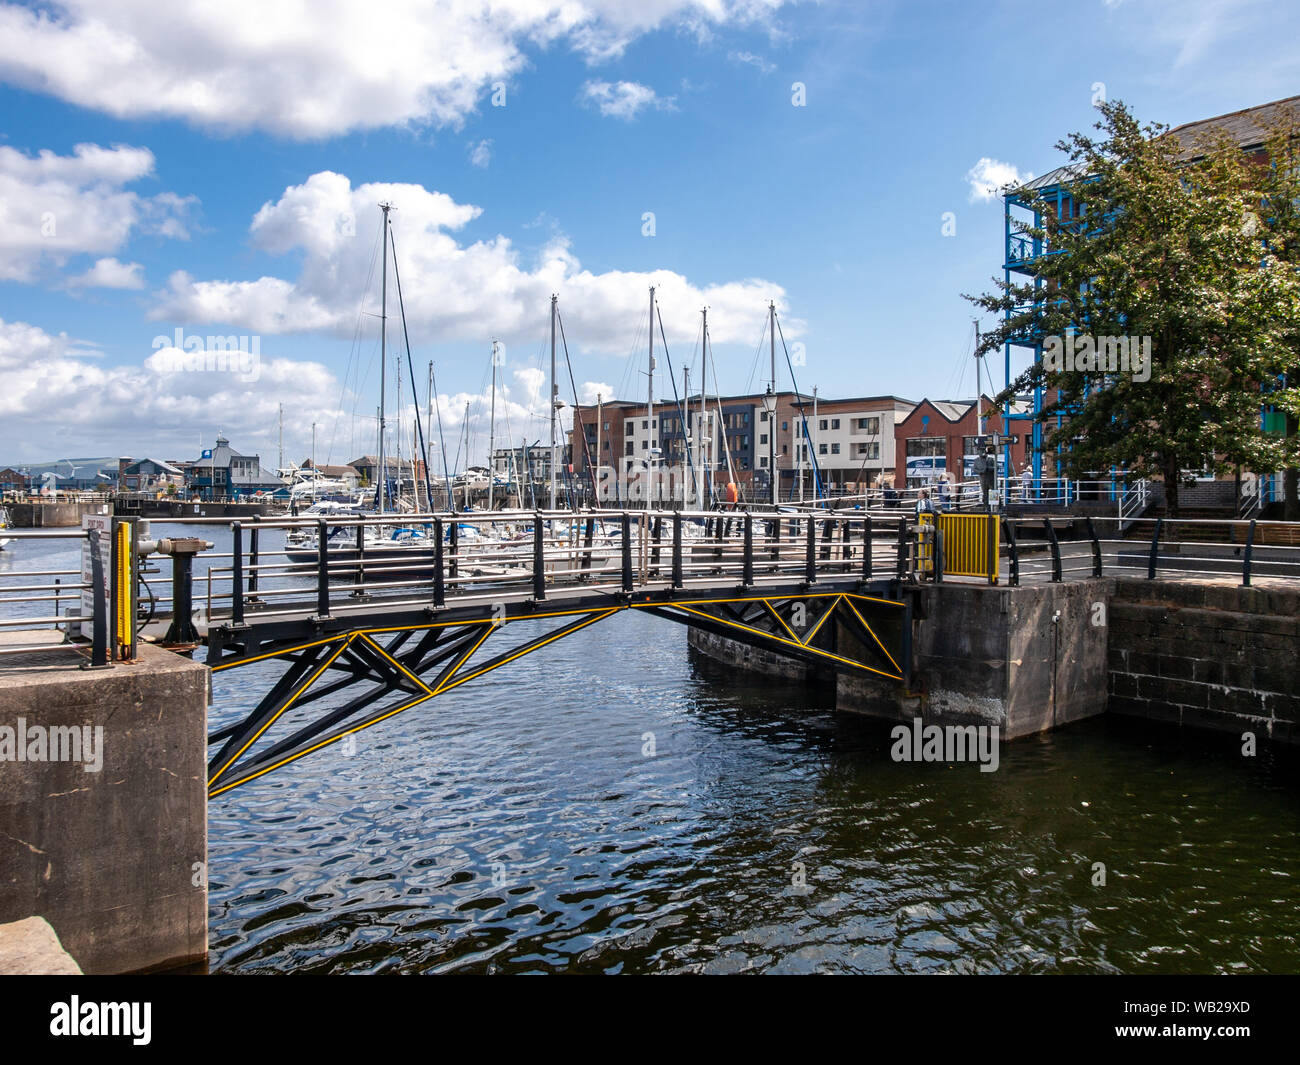 Swansea Marina pedestrian swing bridge with boats and yachts off to the east. Swansea, Wales, UK. Stock Photo